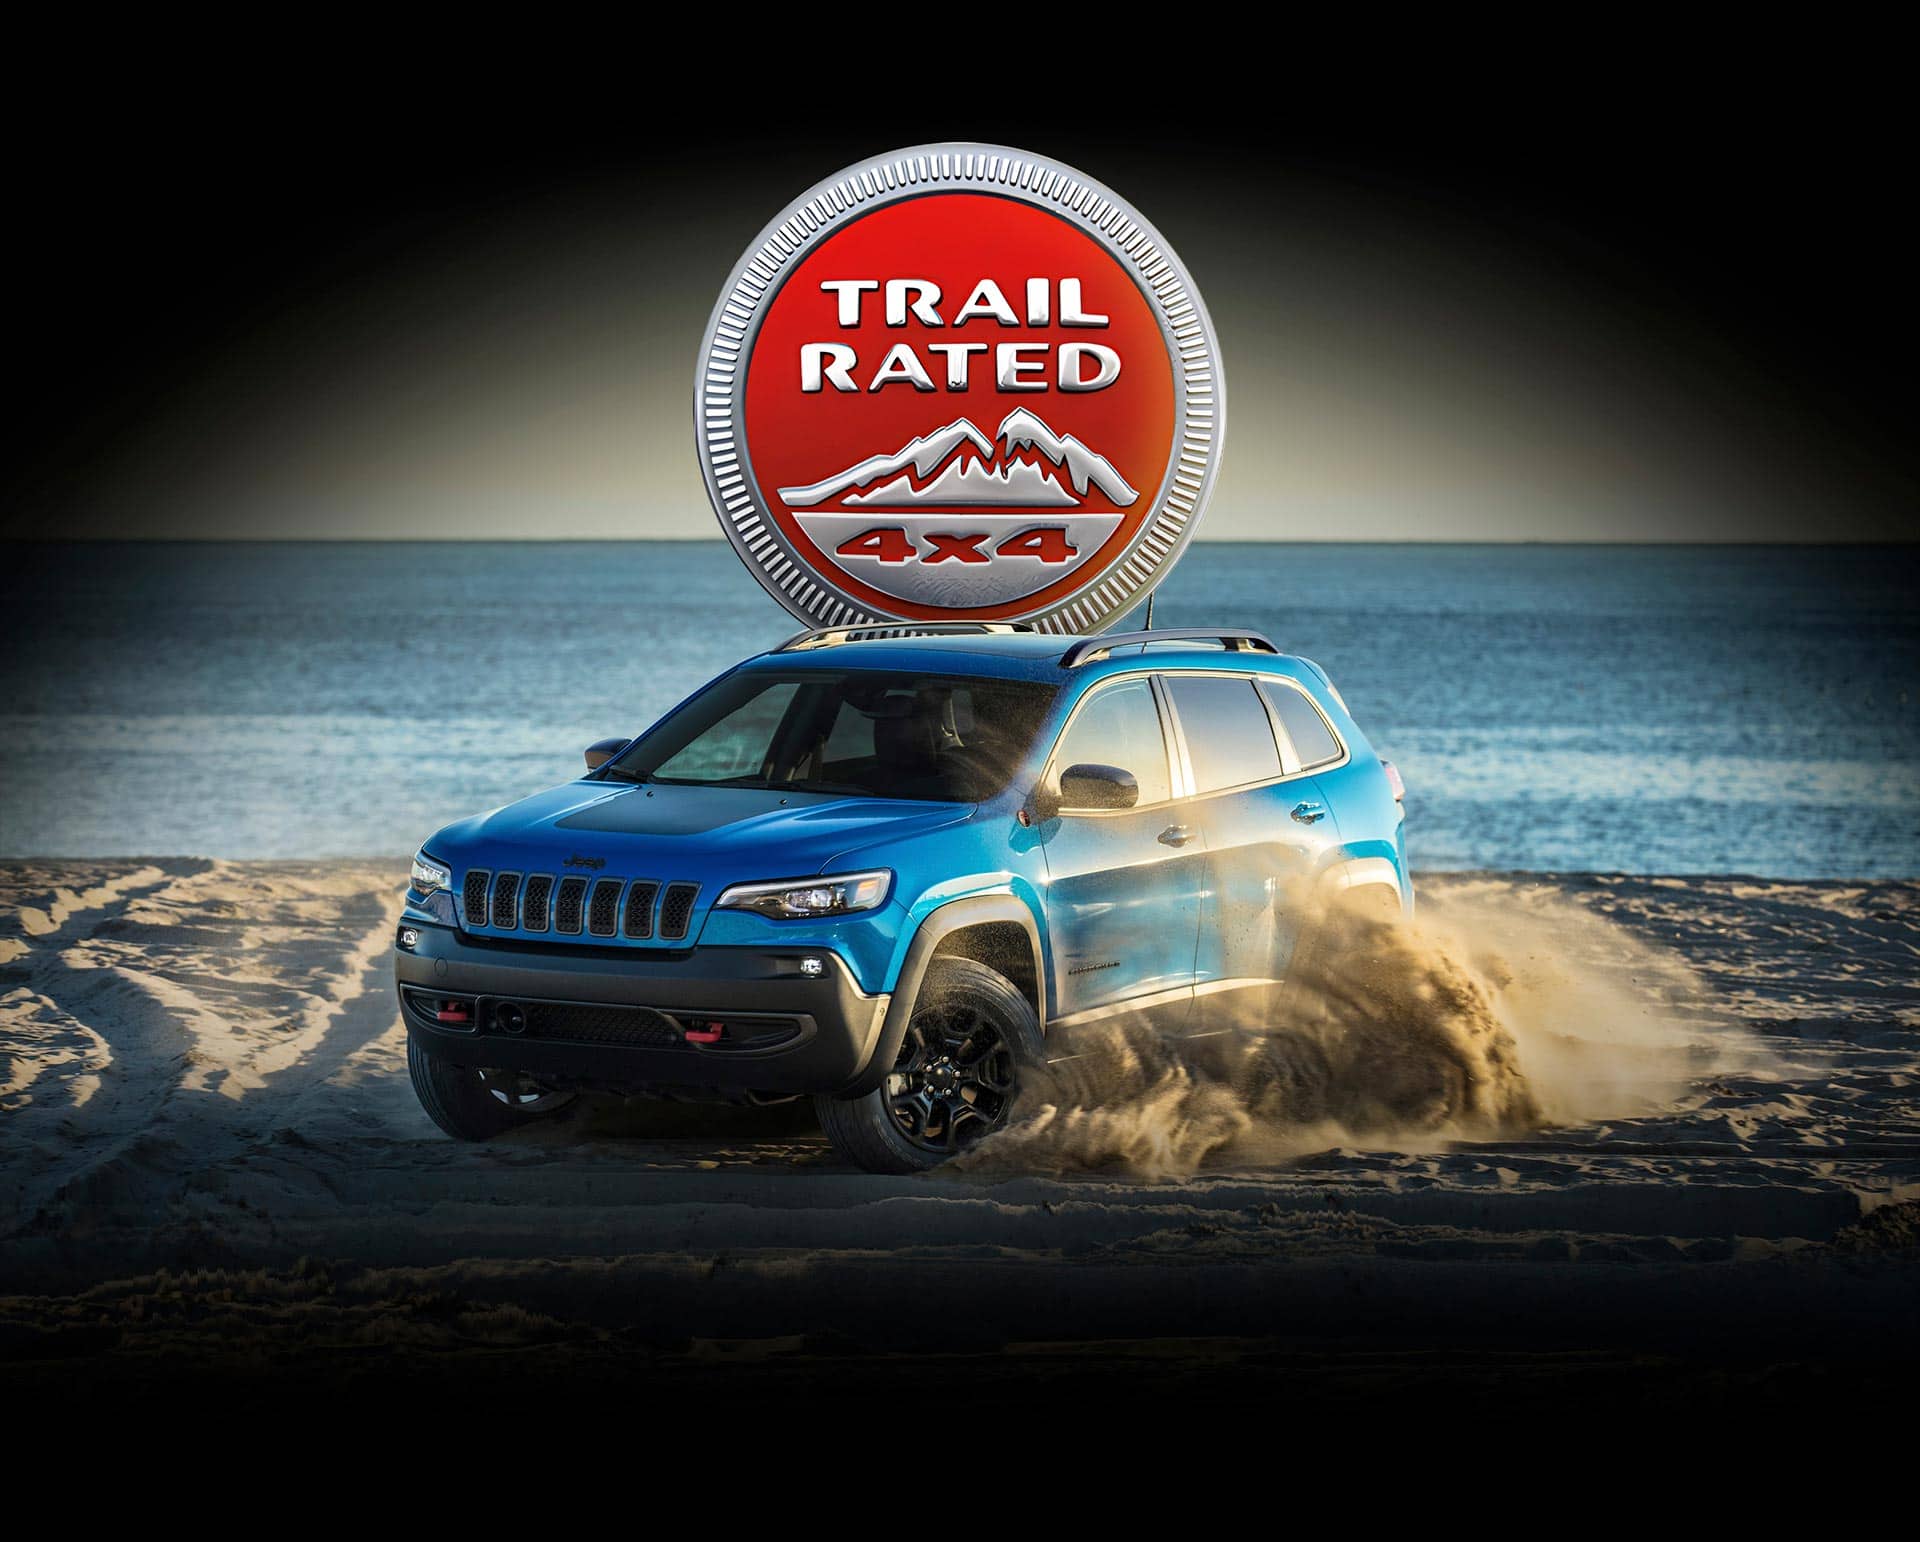 The Trail Ratted 4x4 badge. A blue 2023 Jeep Cherokee Trailhawk kicking up sand on a beach beside crystal blue water.